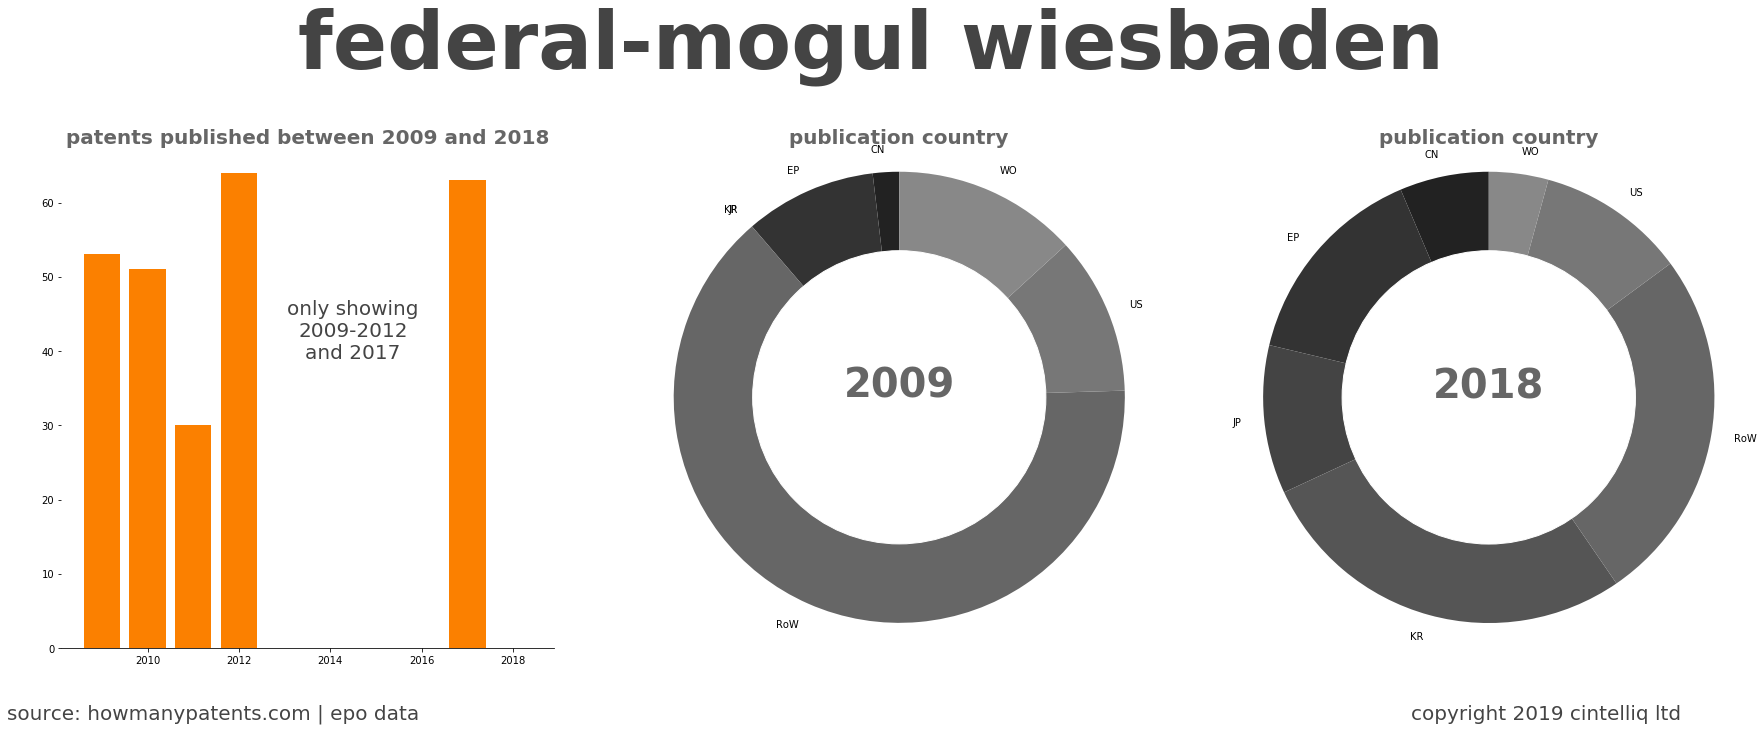 summary of patents for Federal-Mogul Wiesbaden